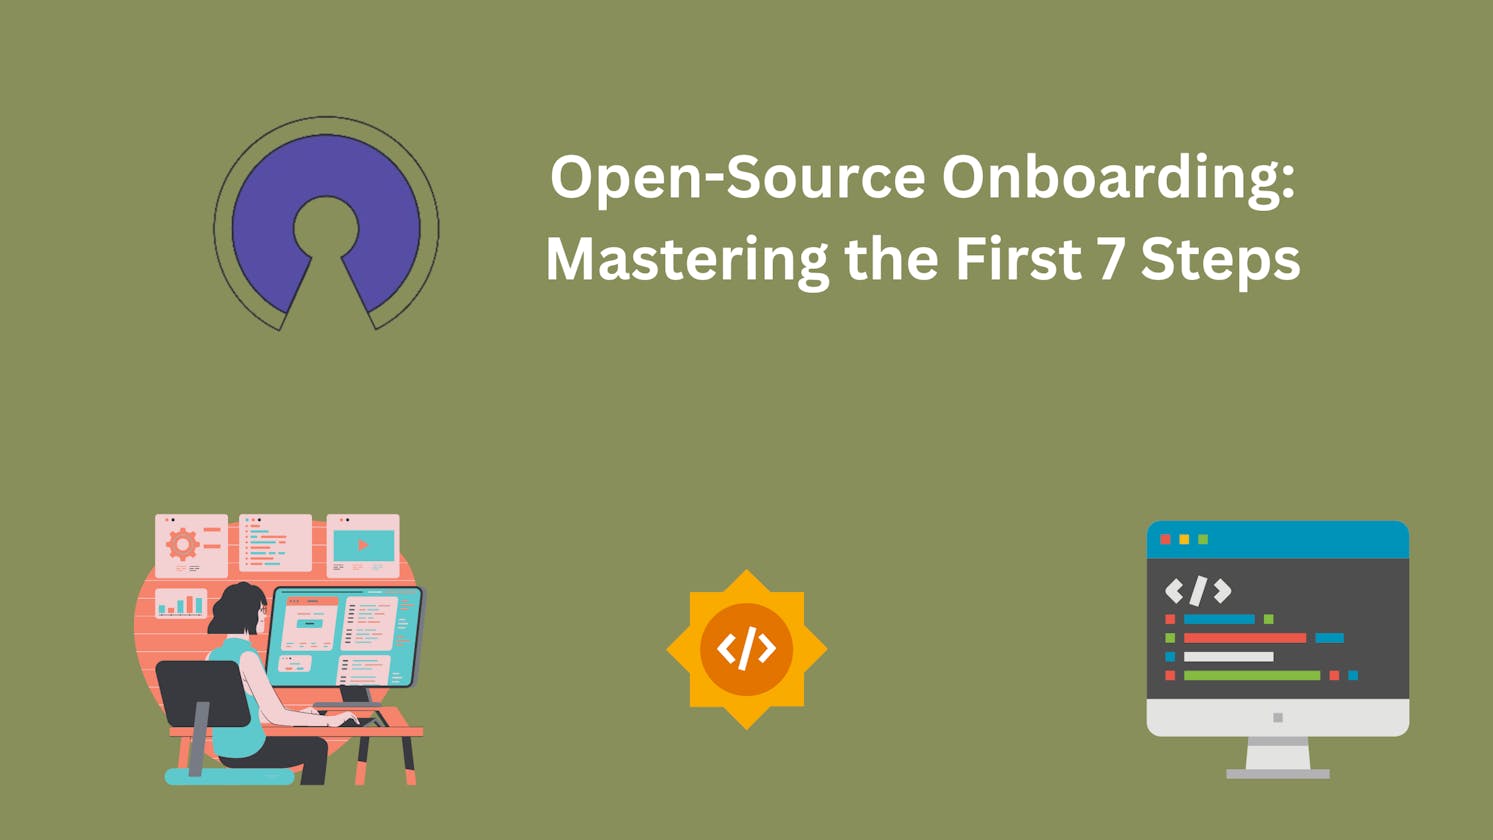 Open-Source Onboarding: Mastering the First 7 Steps